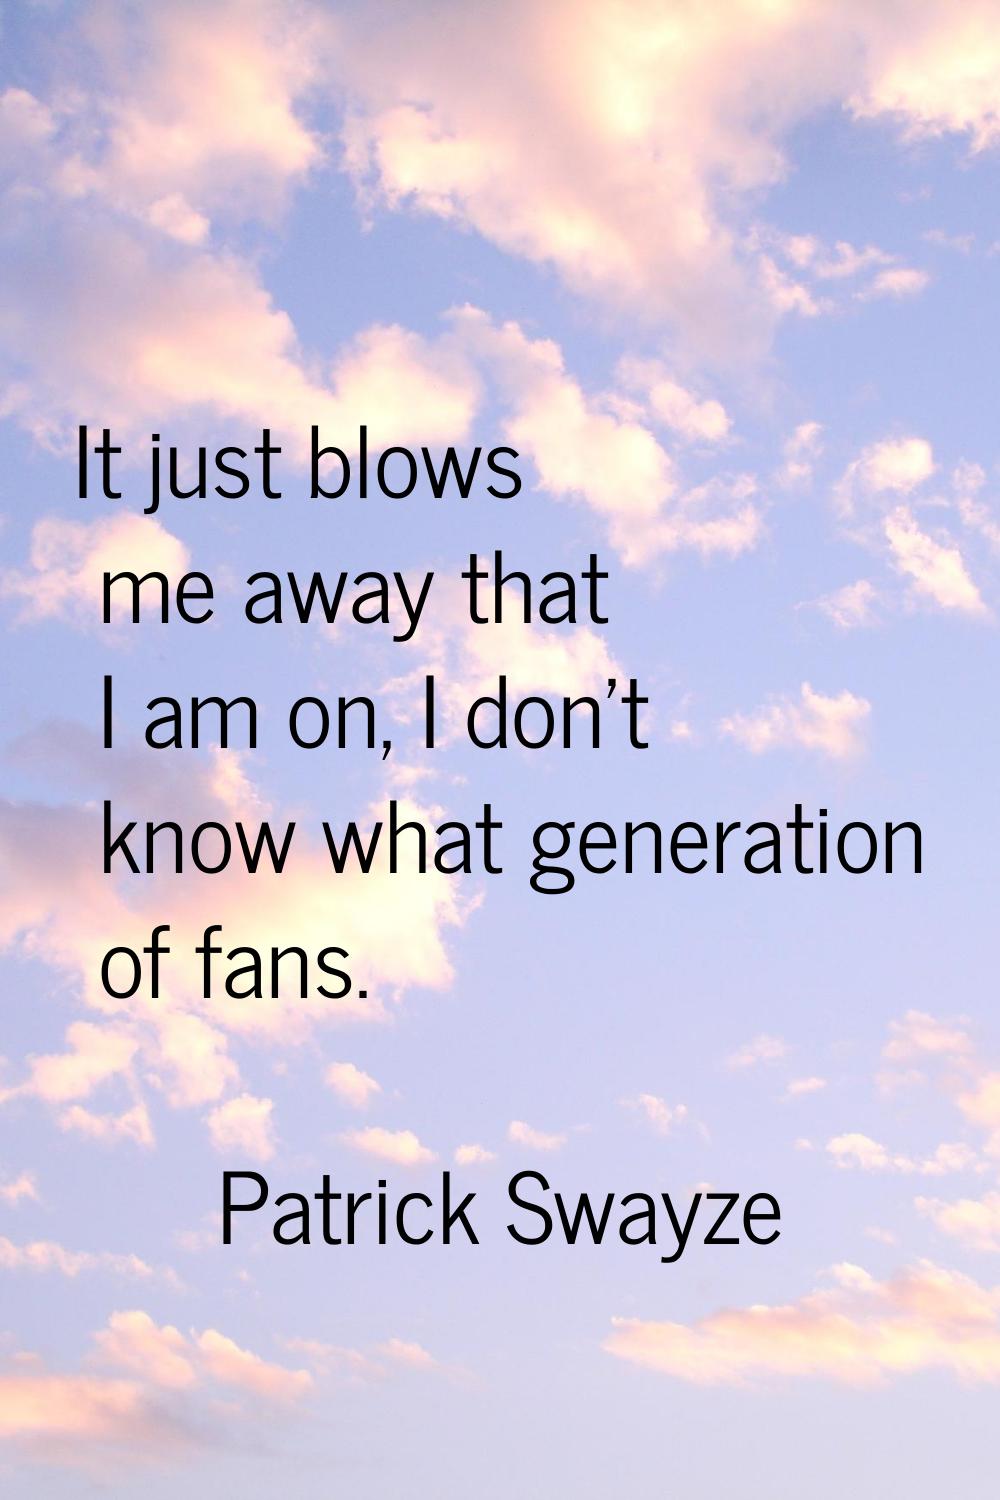 It just blows me away that I am on, I don't know what generation of fans.